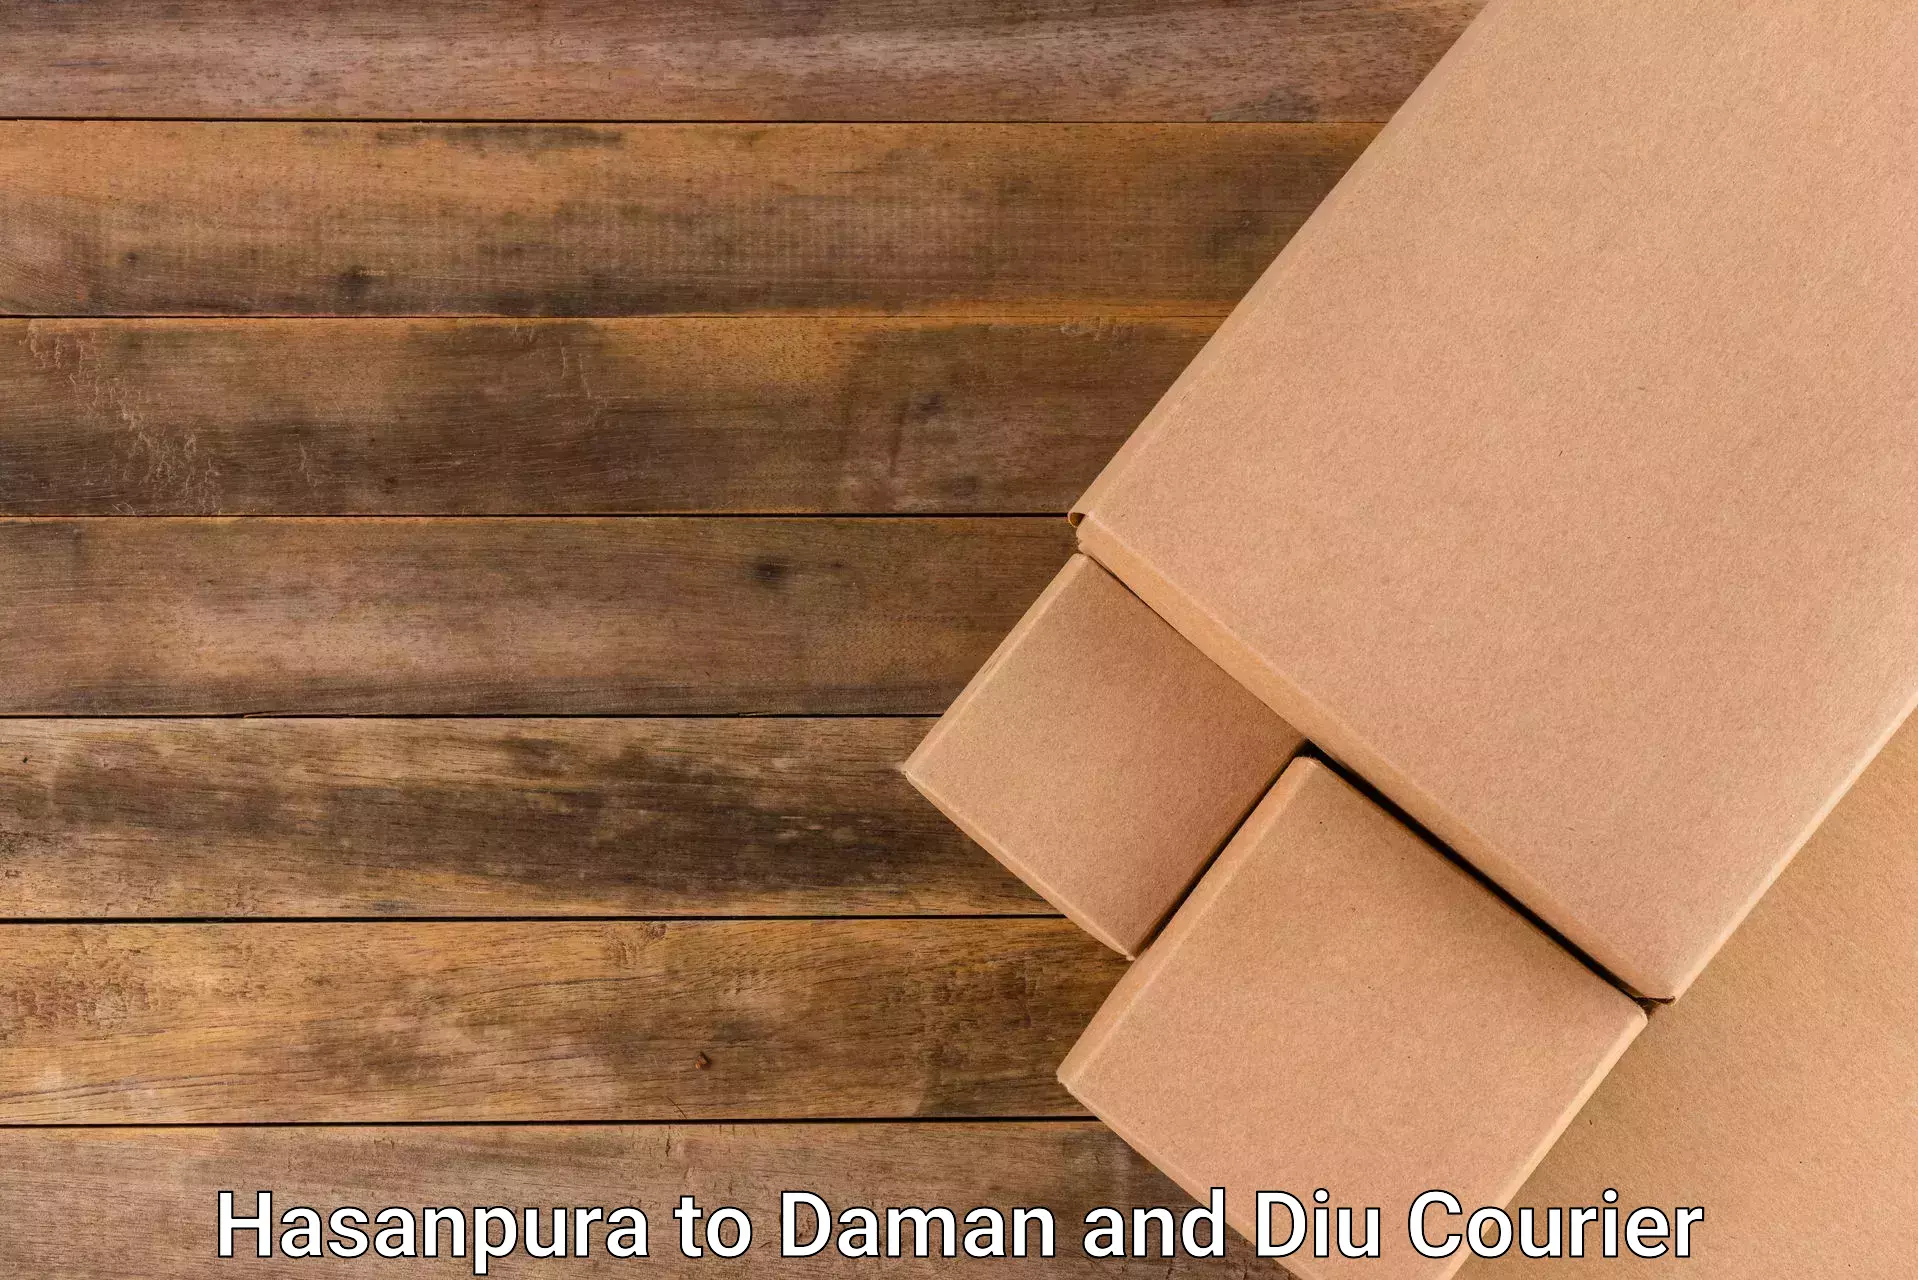 Professional courier handling Hasanpura to Daman and Diu